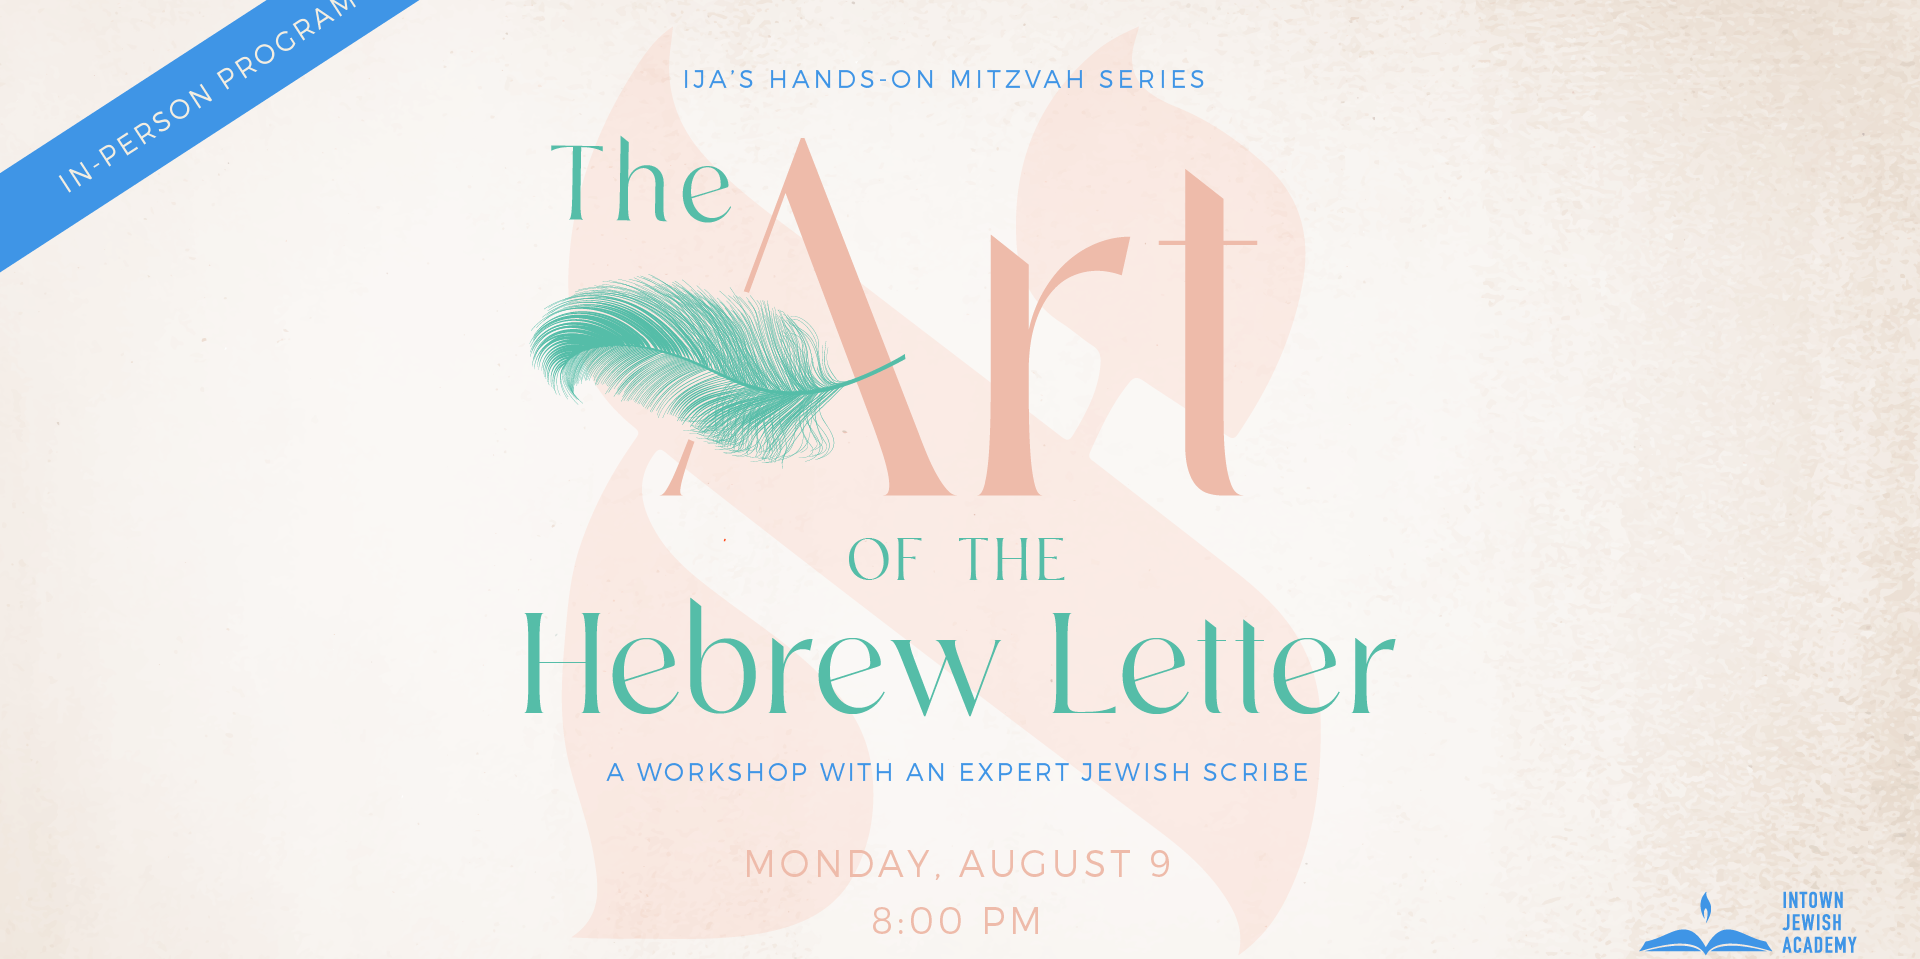 The Art of the Hebrew Letter promotional image